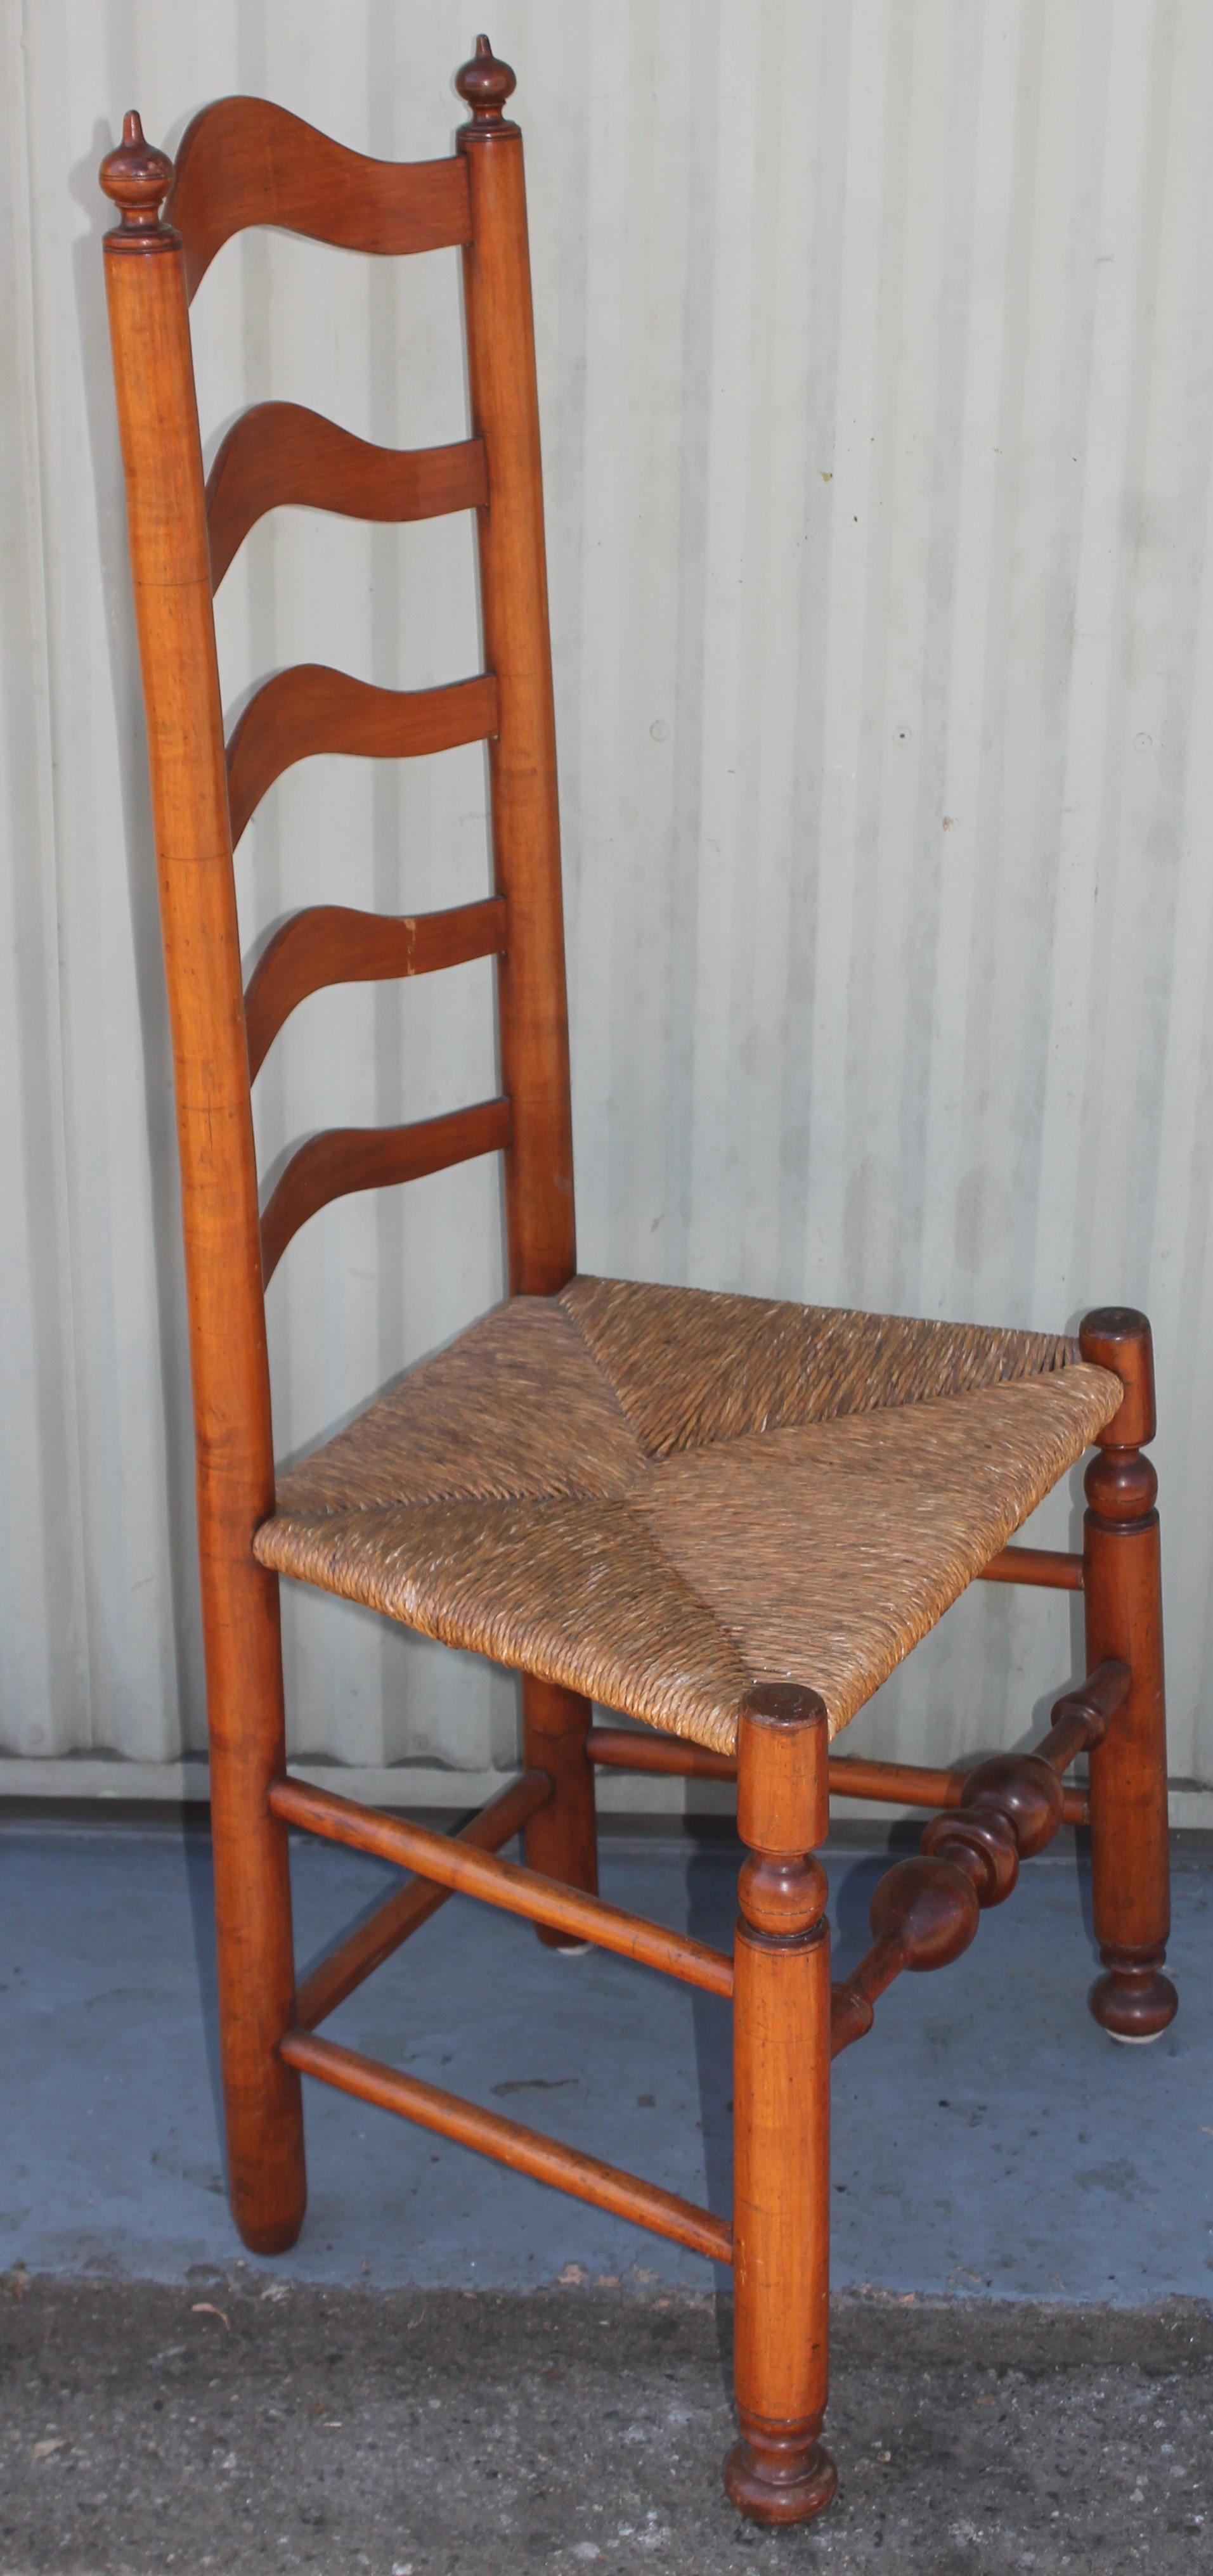 These ladder back chairs are from Delaware River Valley and have the original woven seats. Selling as a pair.